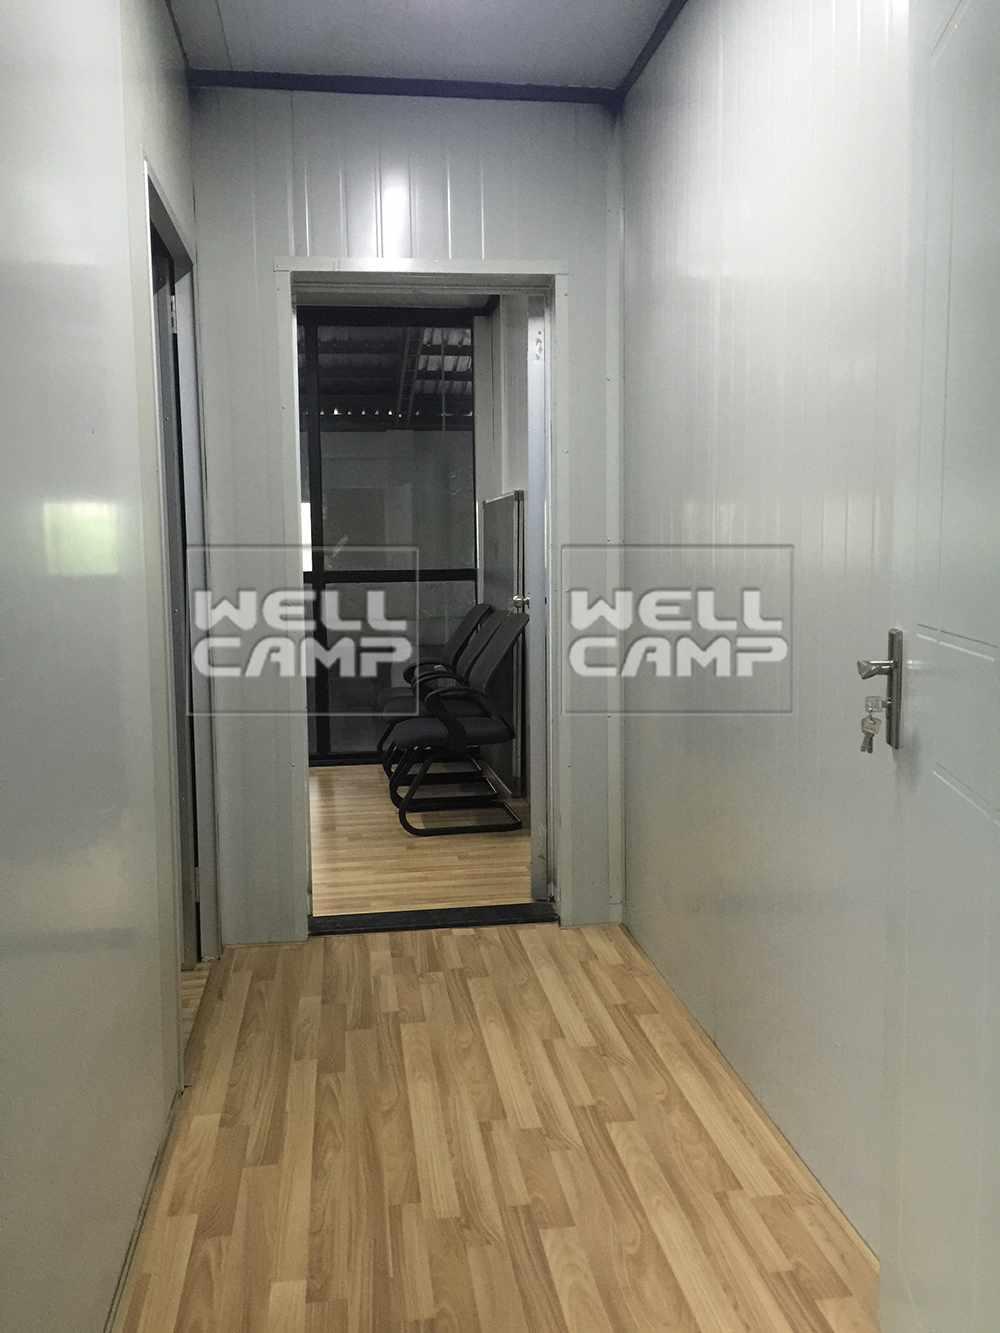 The project of detachable container office in China